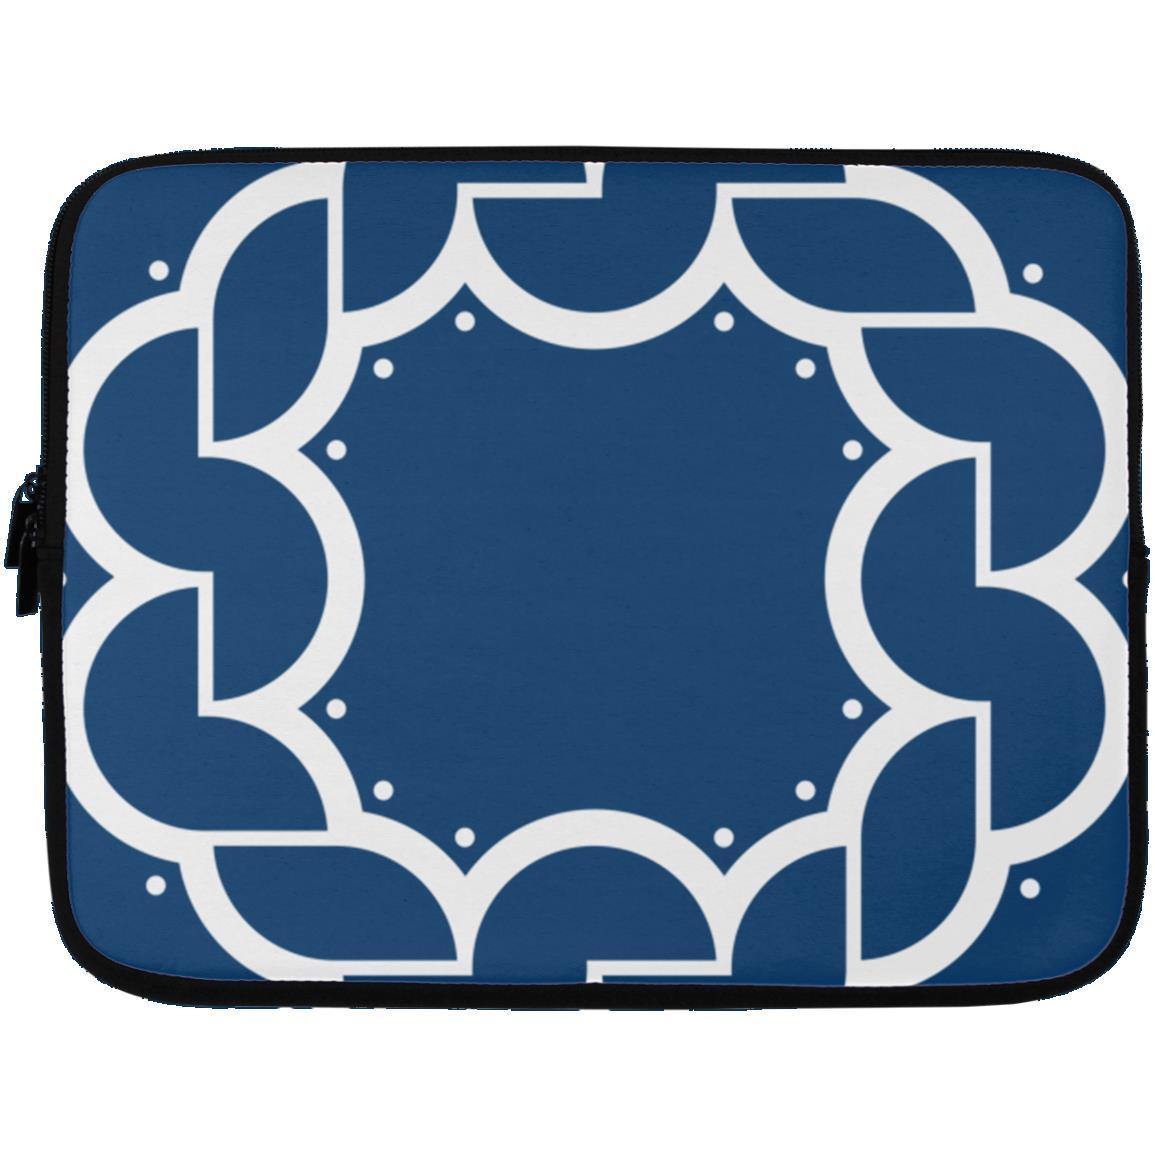 Crop Circle Laptop Sleeve - Windmill Hill 5 - Shapes of Wisdom